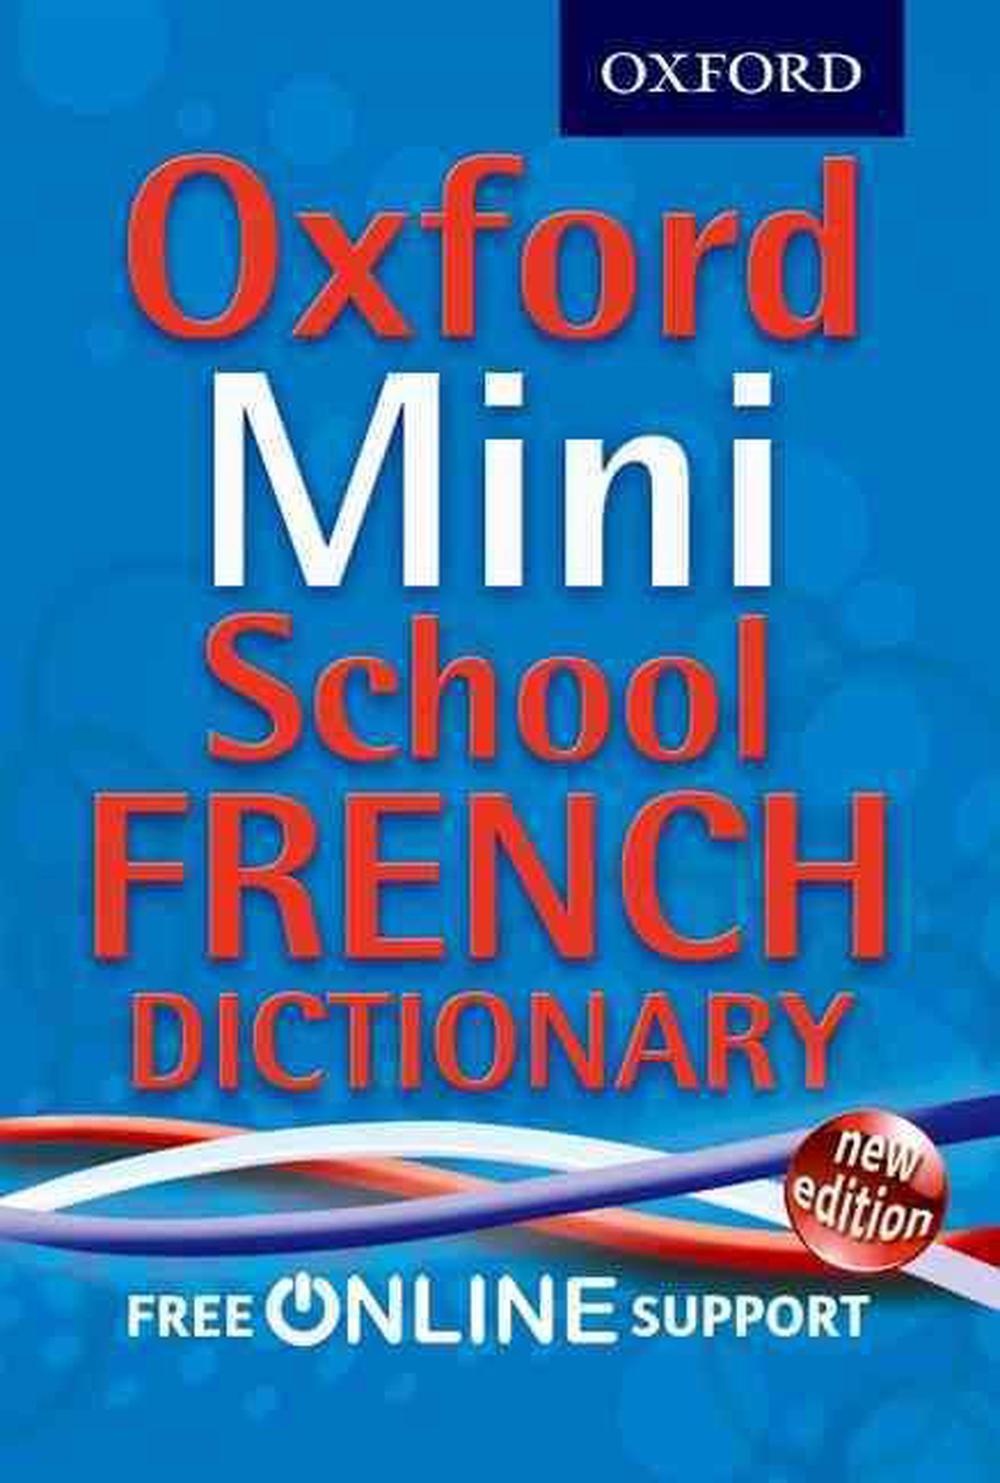 Oxford Mini School French Dictionary by Oxford ...